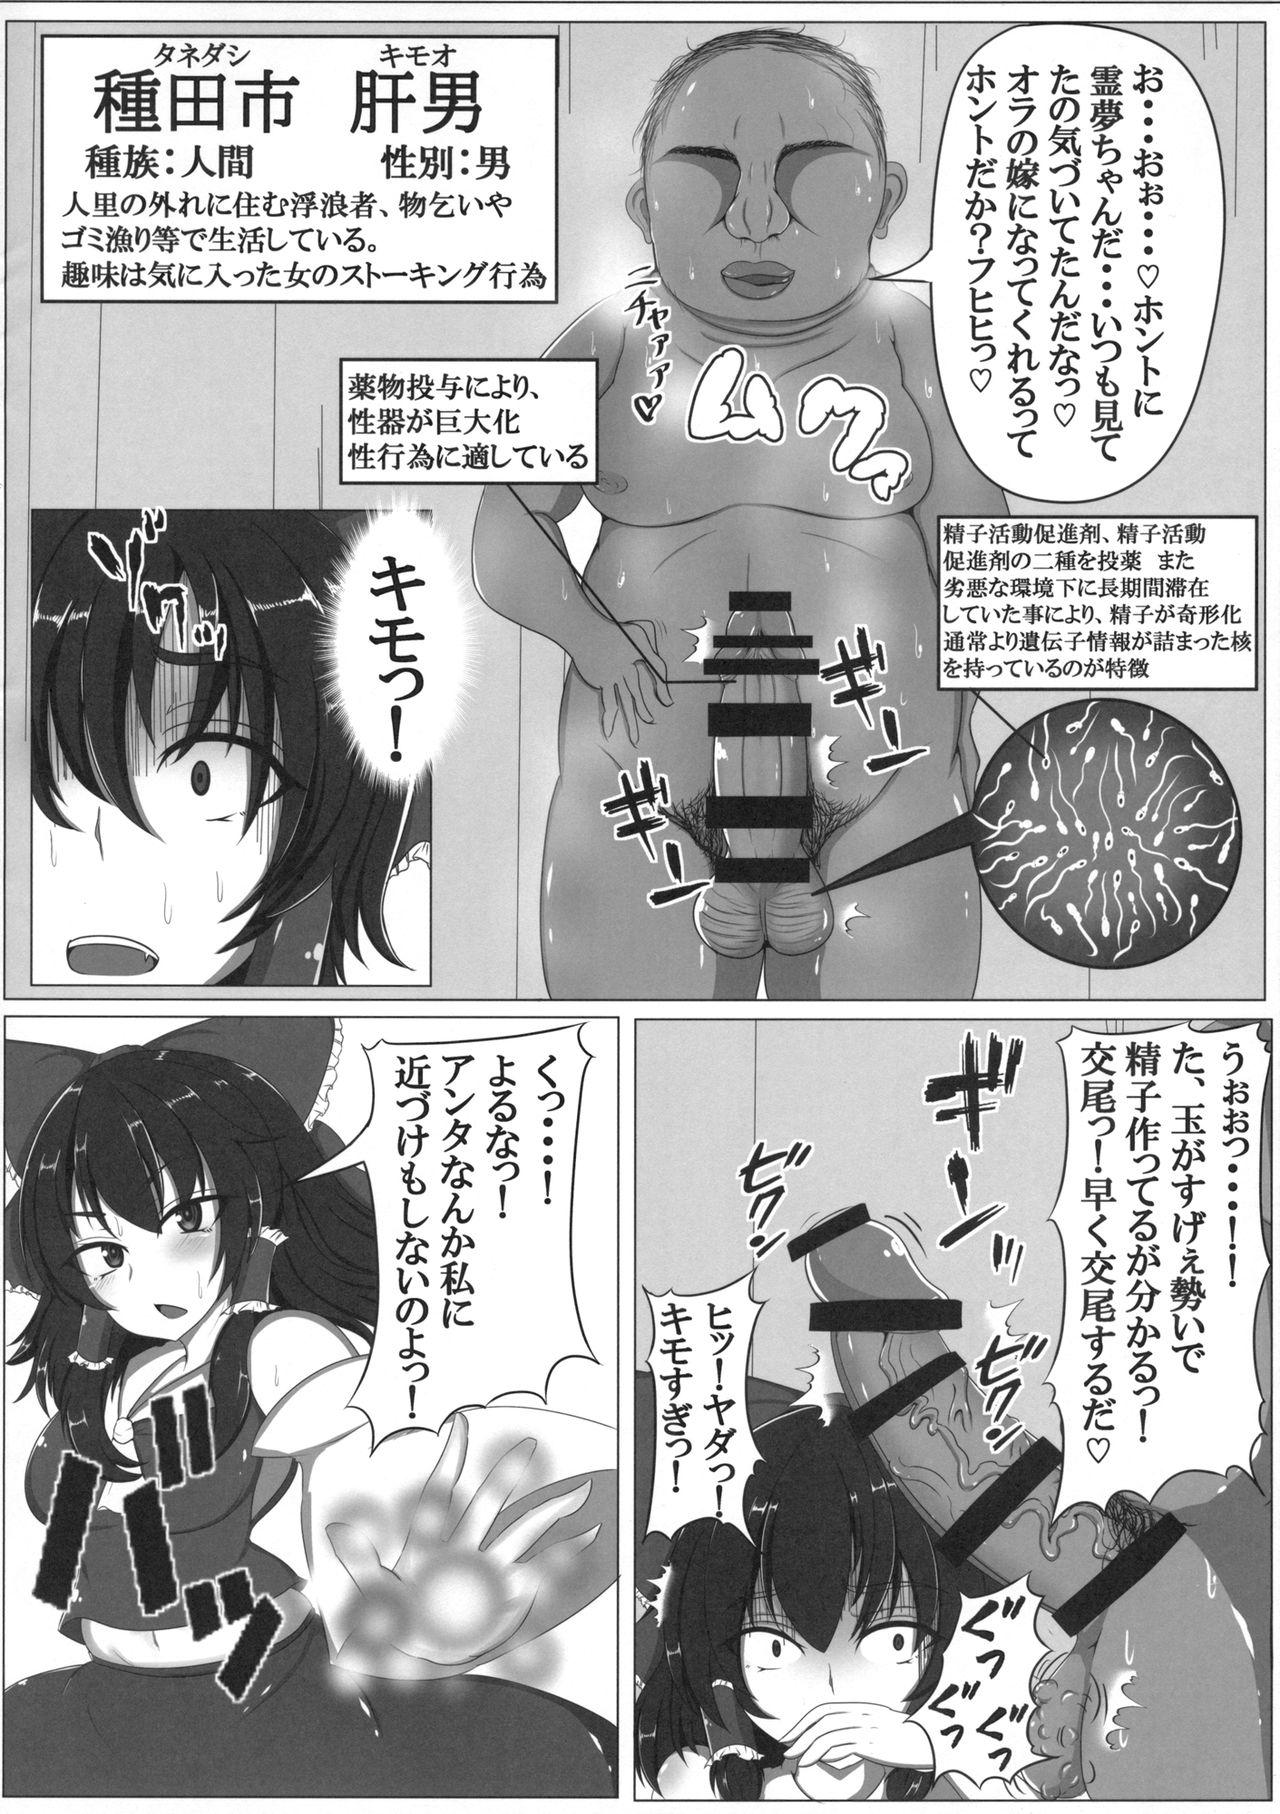 Gay Pawn 東方婚姻録～博麗霊夢編～ - Touhou project Trap - Page 5